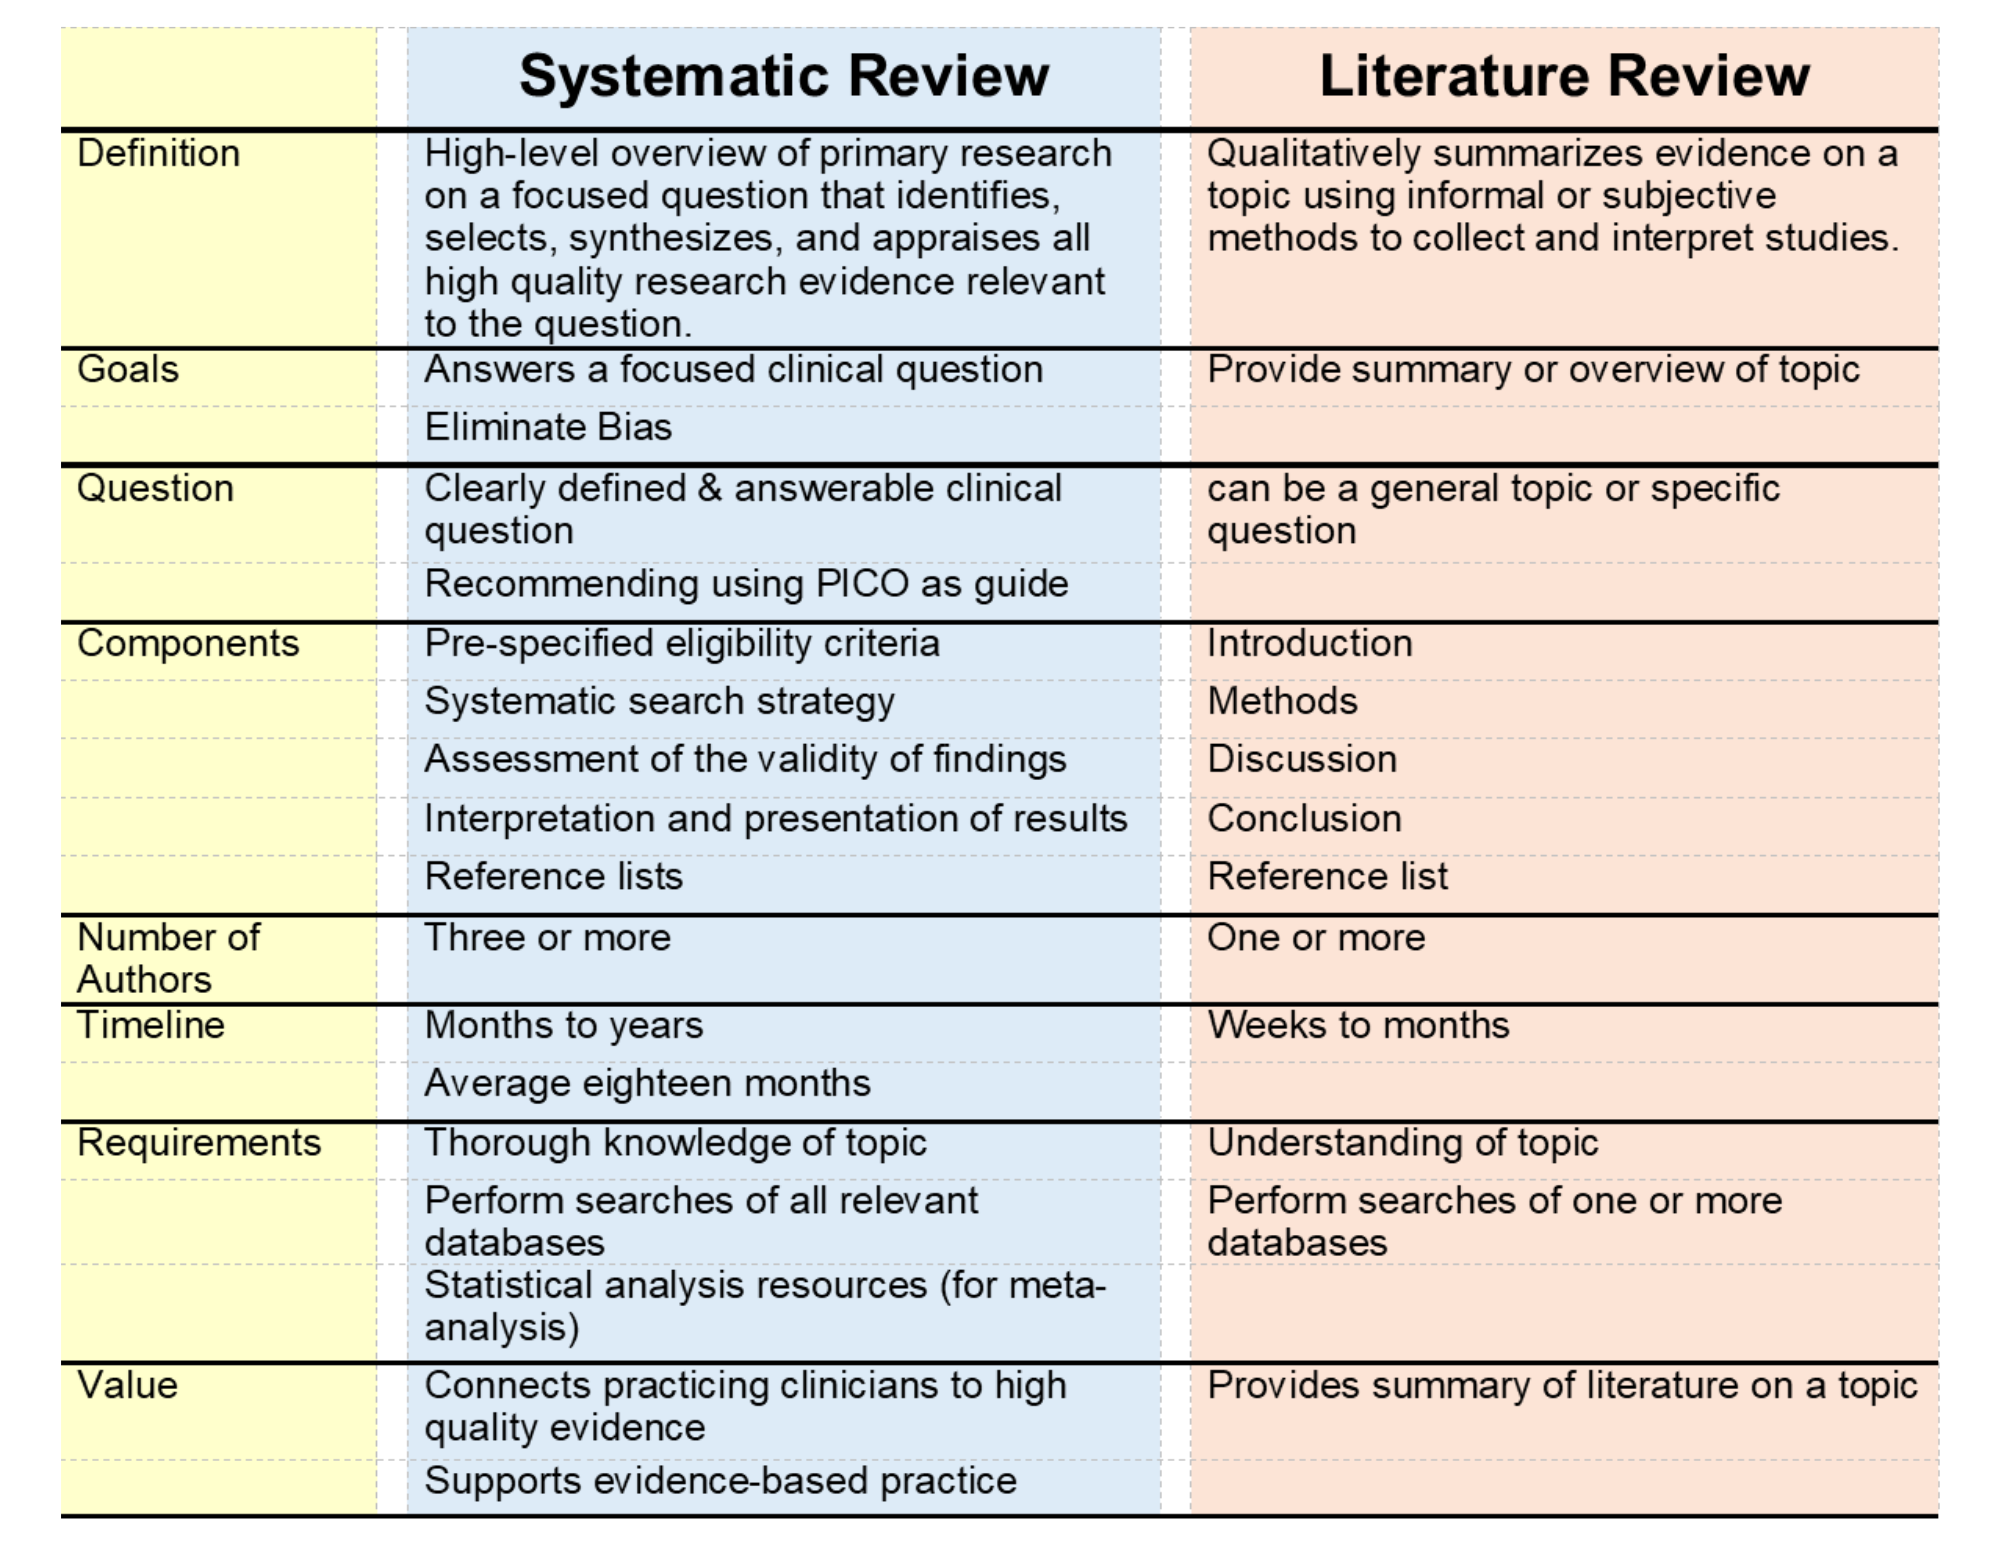 Graphic table charting the differences between a systematic review and a literature review.